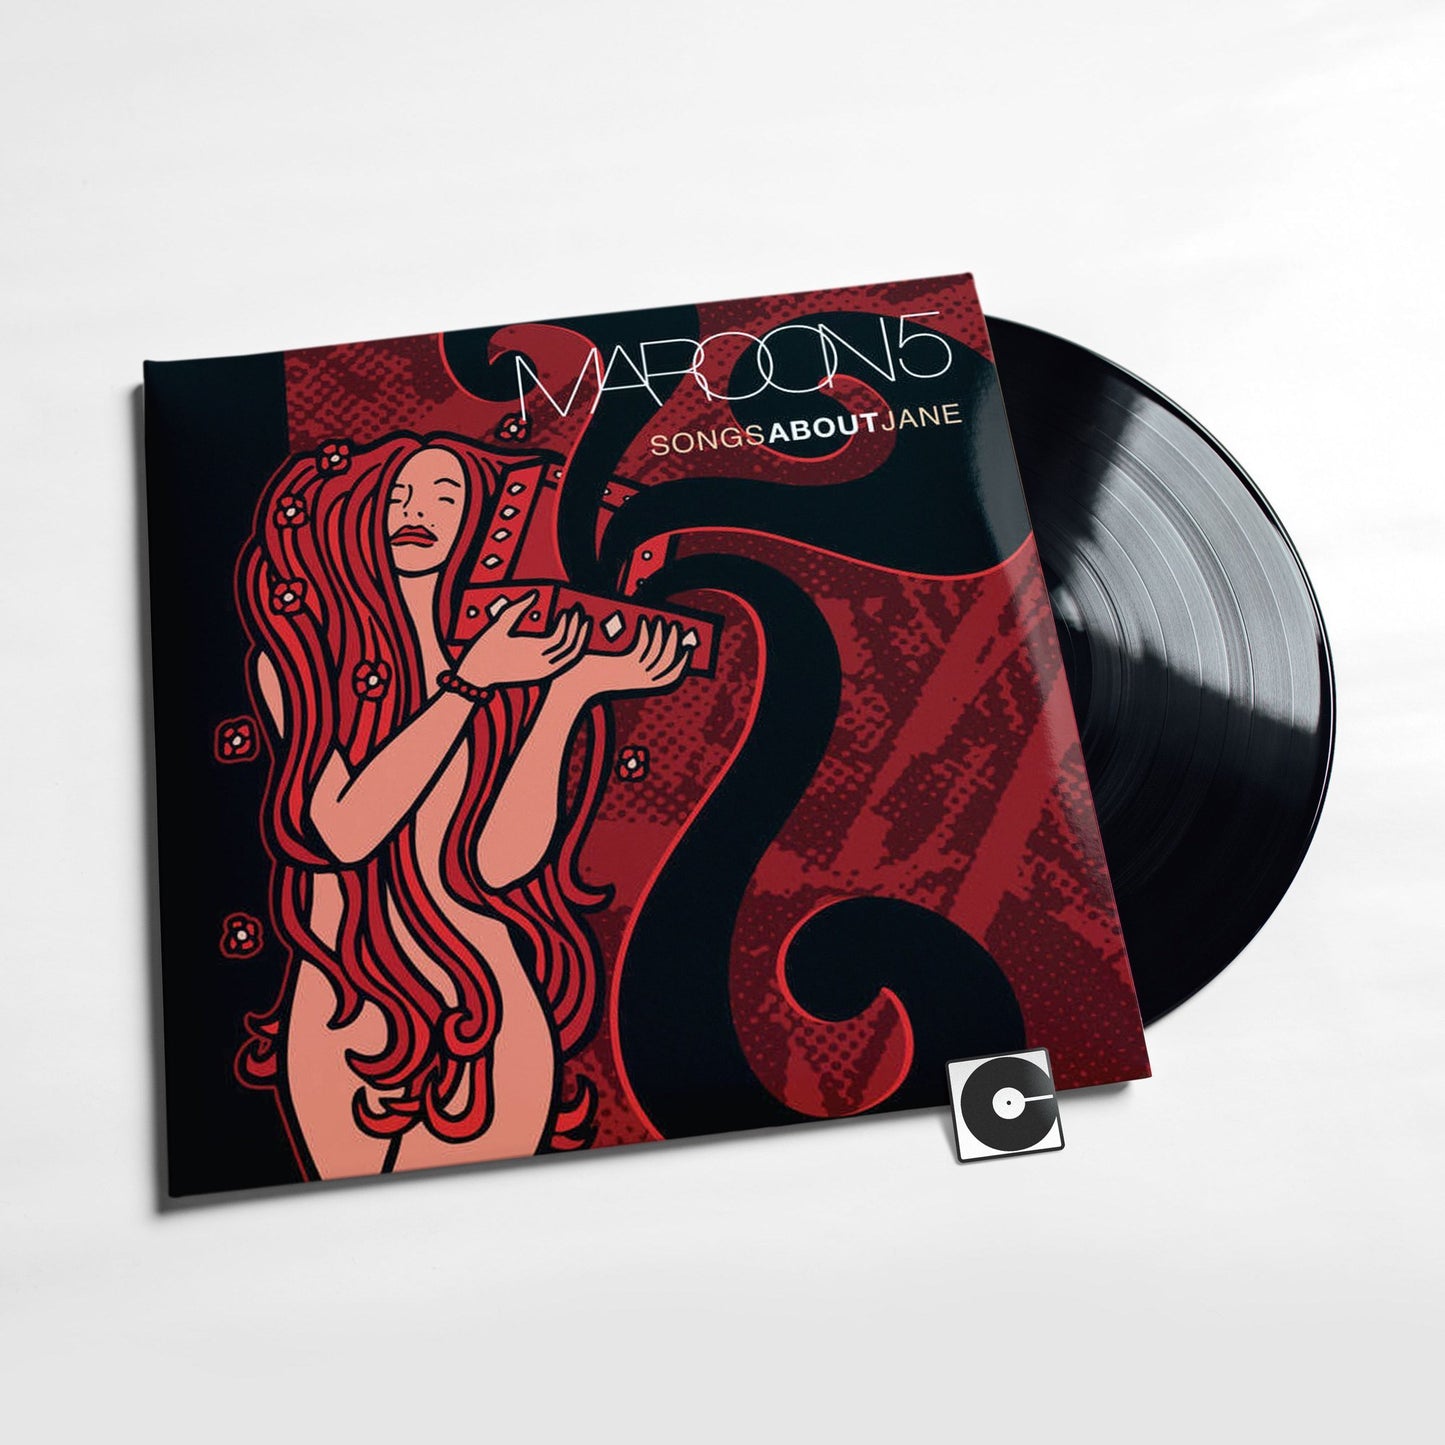 Maroon 5 - "Songs About Jane"